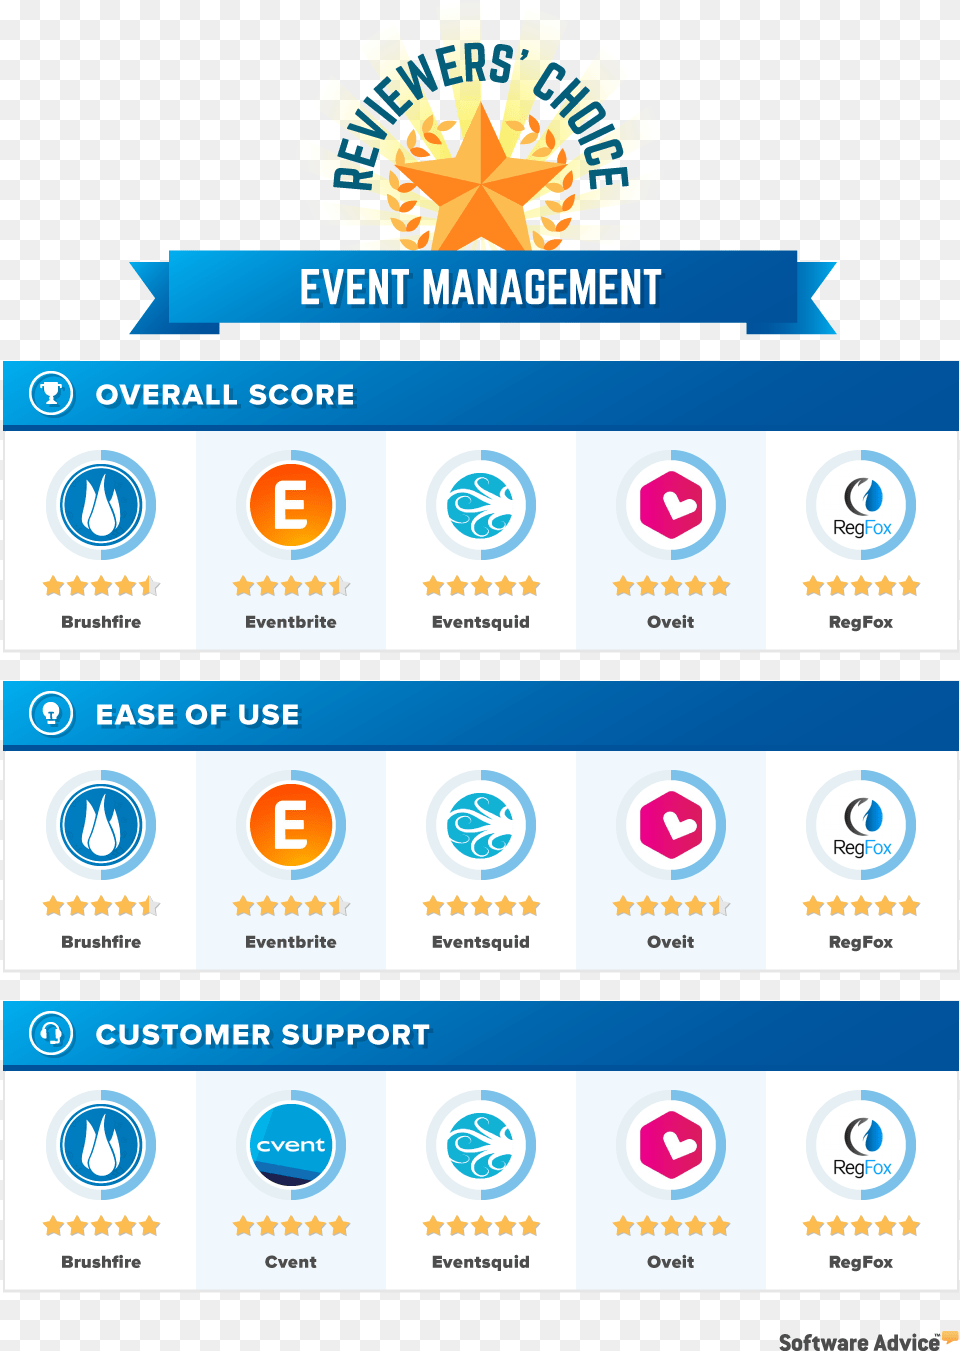 Event Management Reviewers39 Choice Top Video Conferencing Vendors 2017, File, Text Free Transparent Png